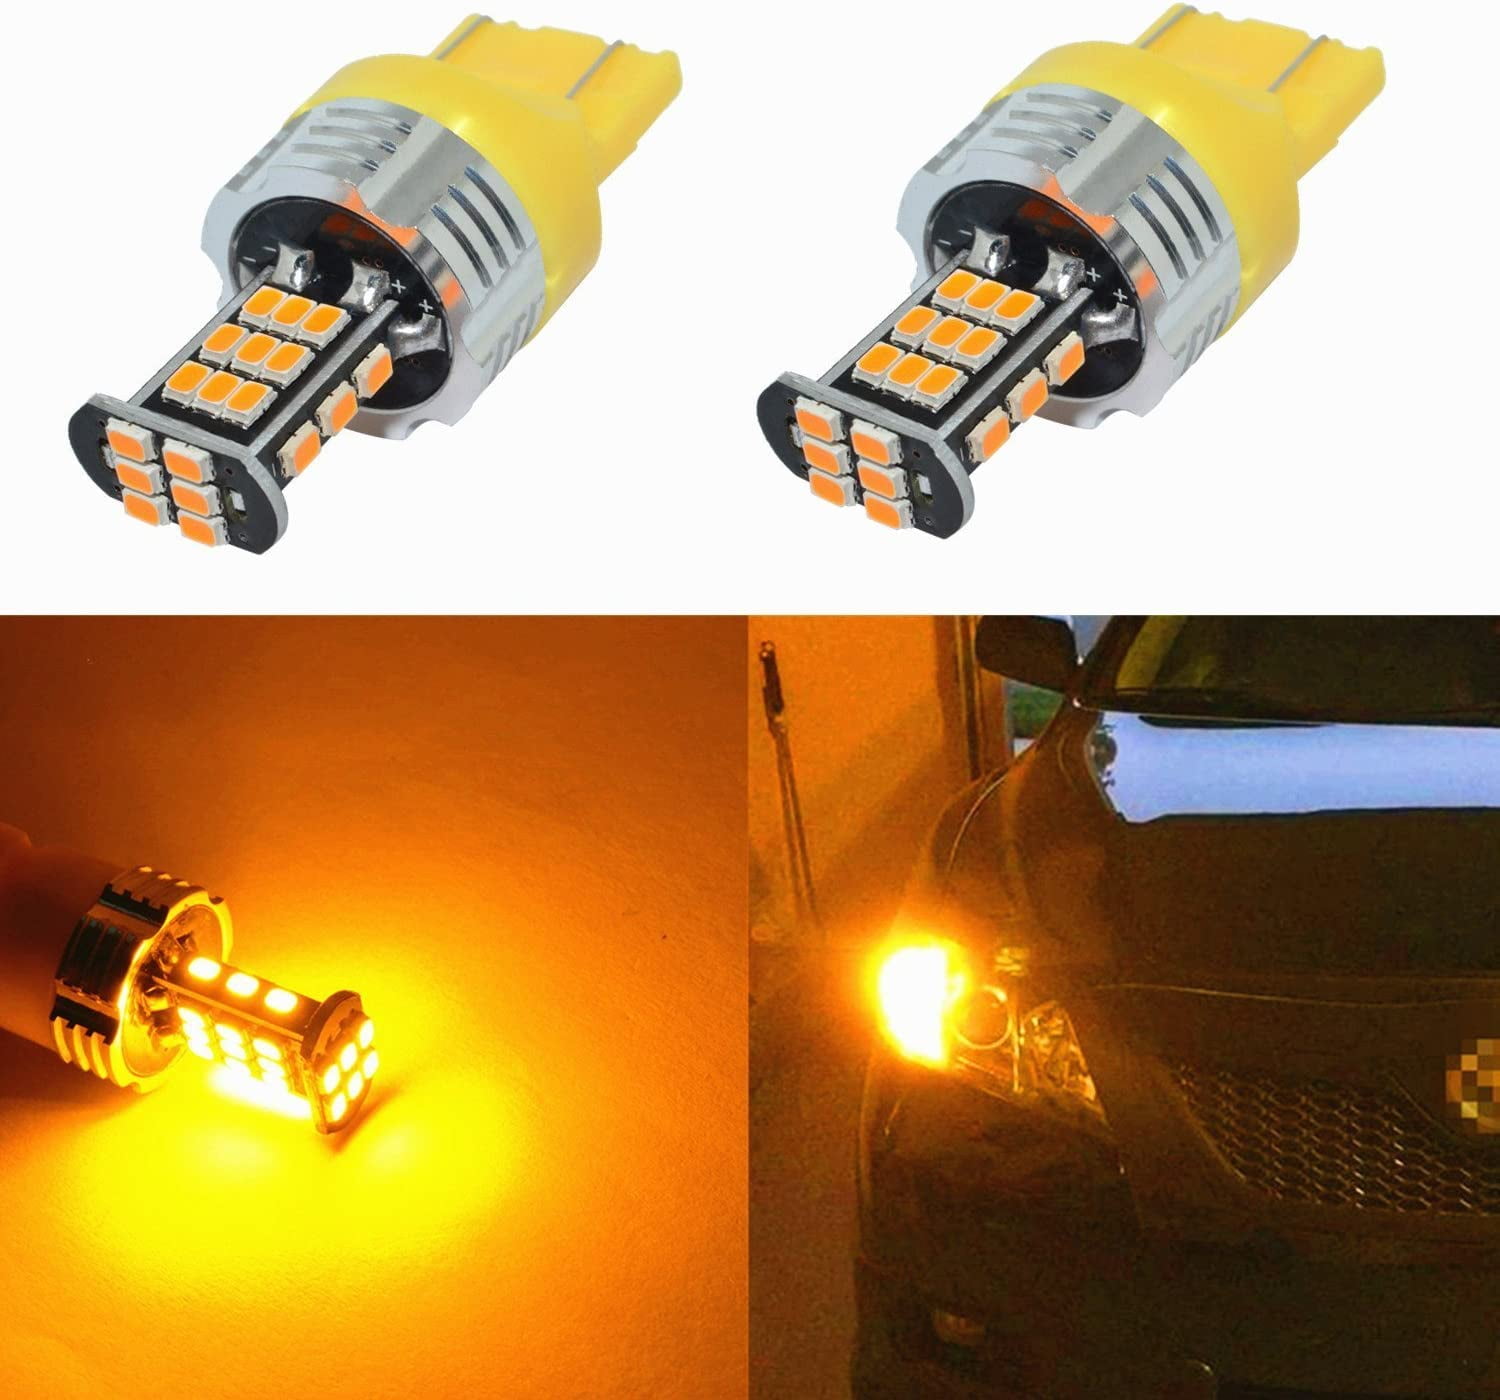 AUXLIGHT 7440 7441 7443 7444 T20 992 W21W LED Bulbs Amber Yellow, Ultra  Bright 57-SMD LED Replacement for Blinker Lights, Turn Signal/Parking or